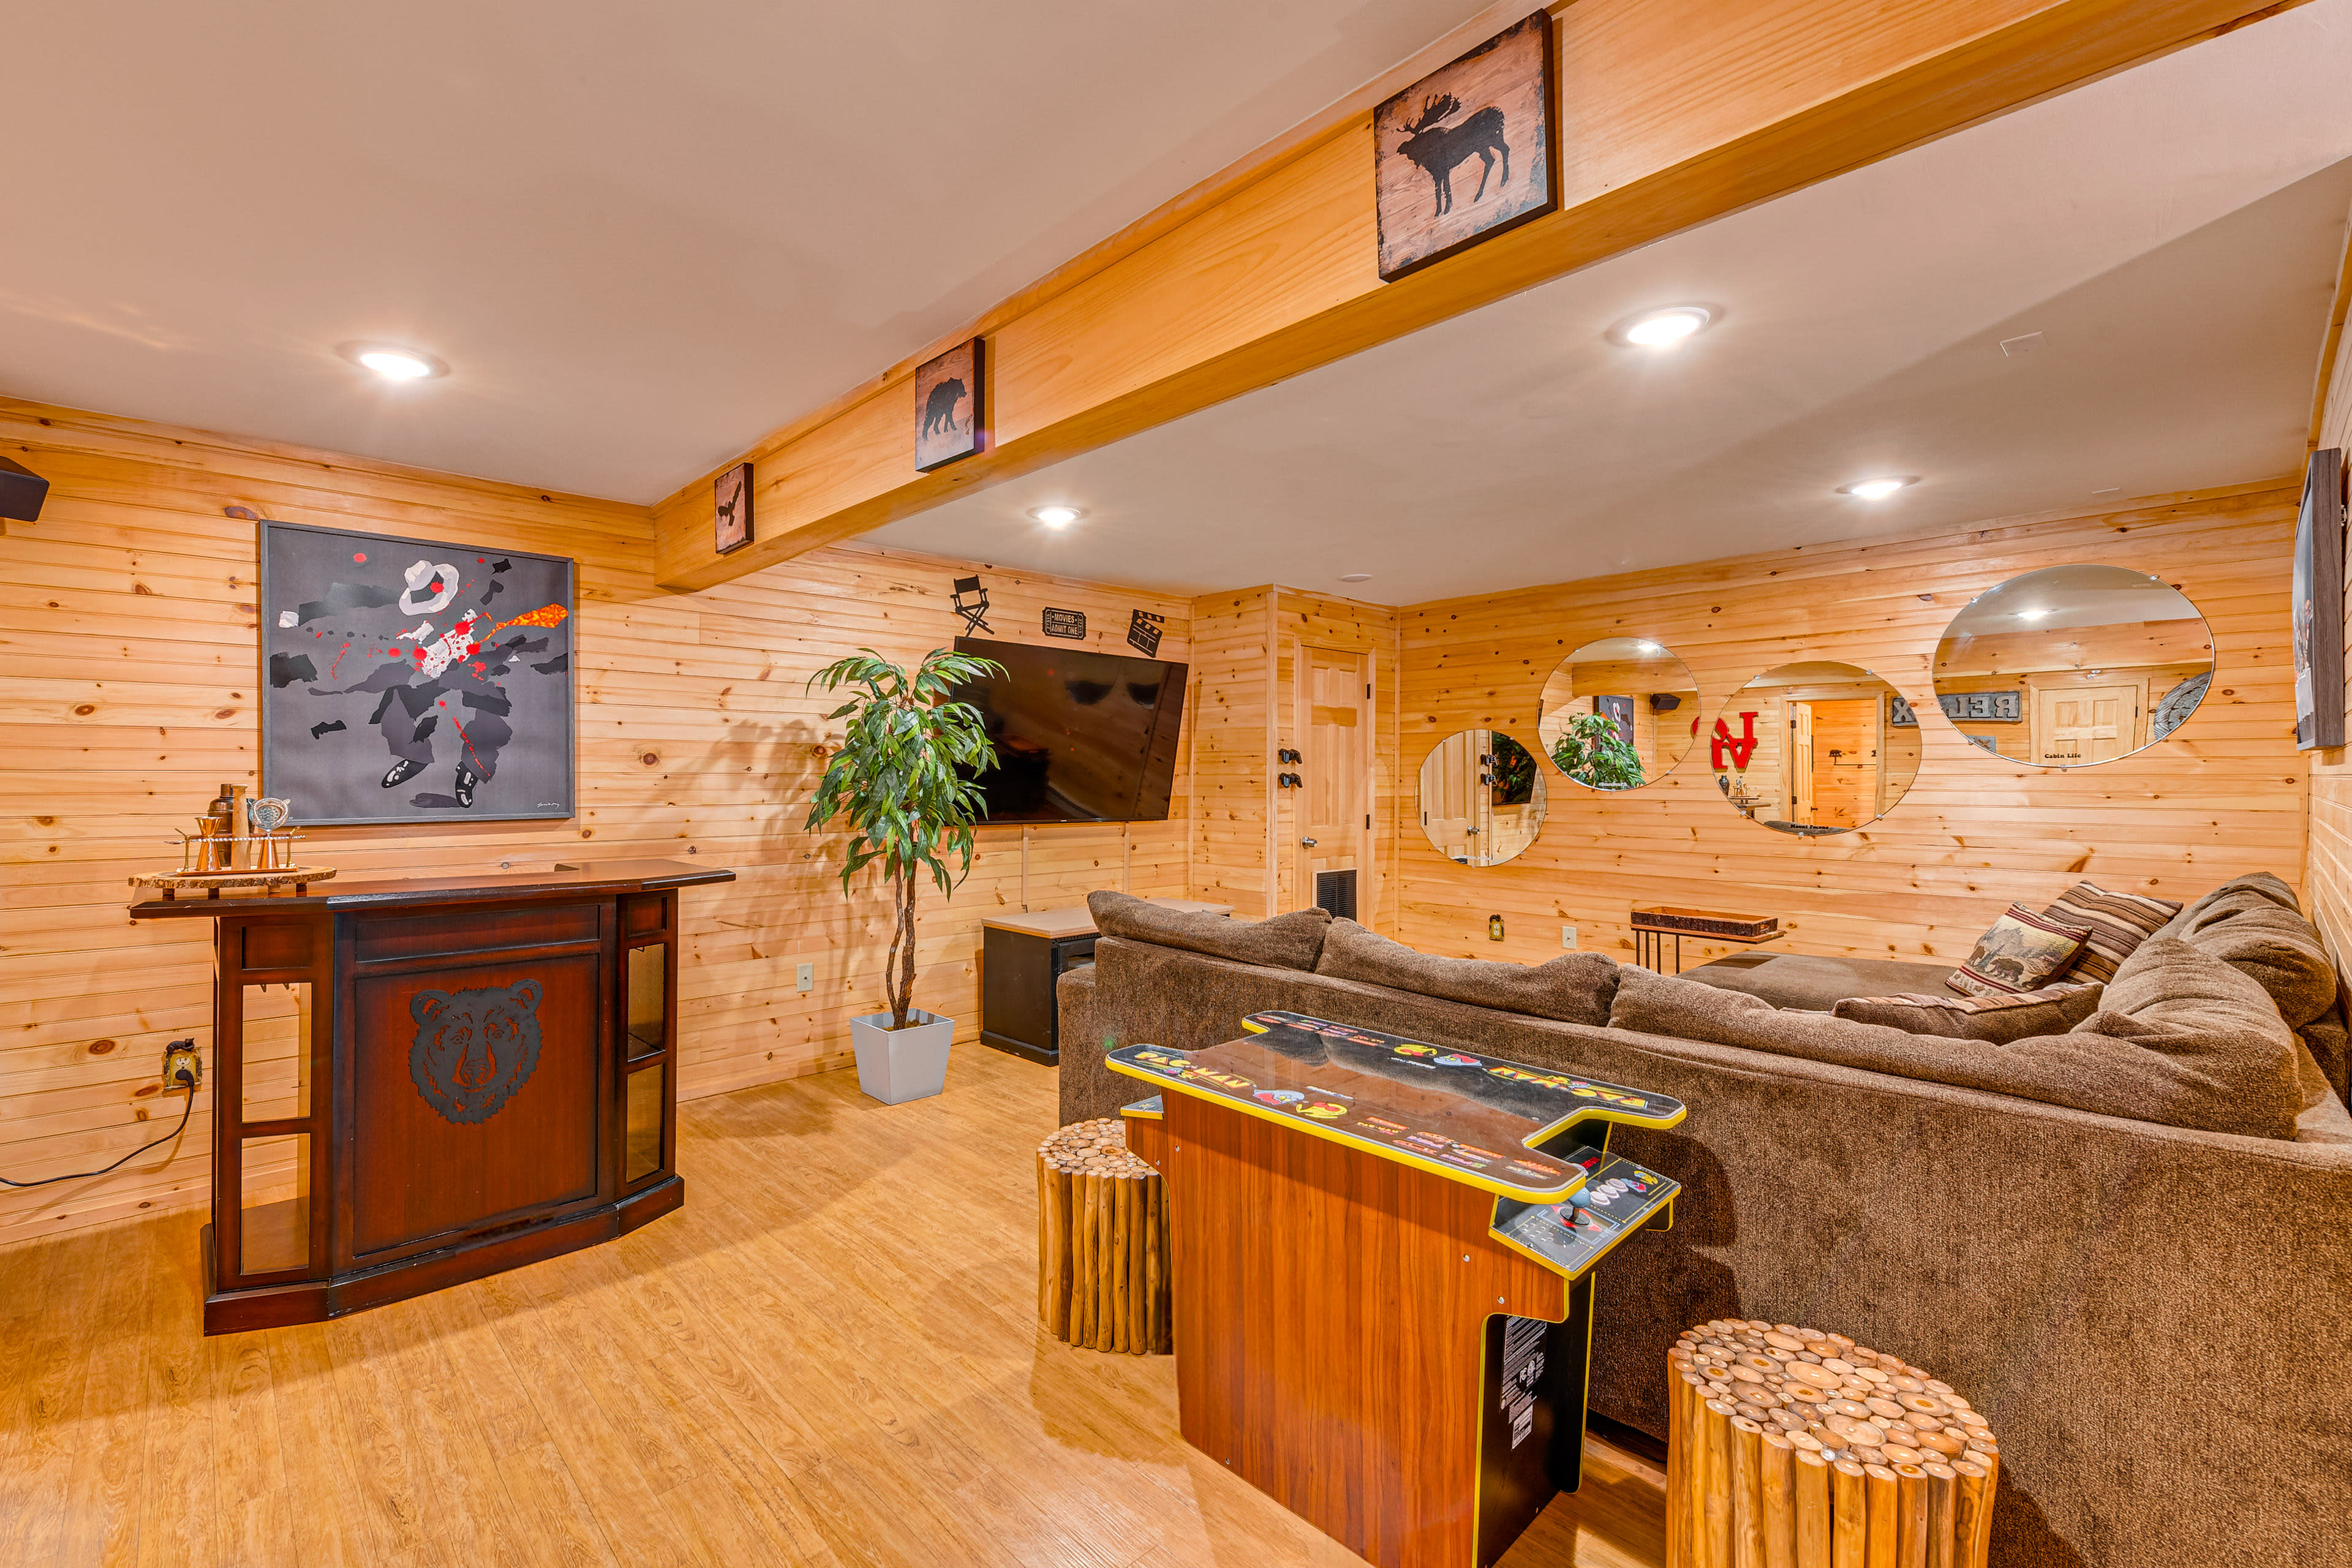 Game Room | Arcade Game Console | Free WiFi | 2-Story Cabin